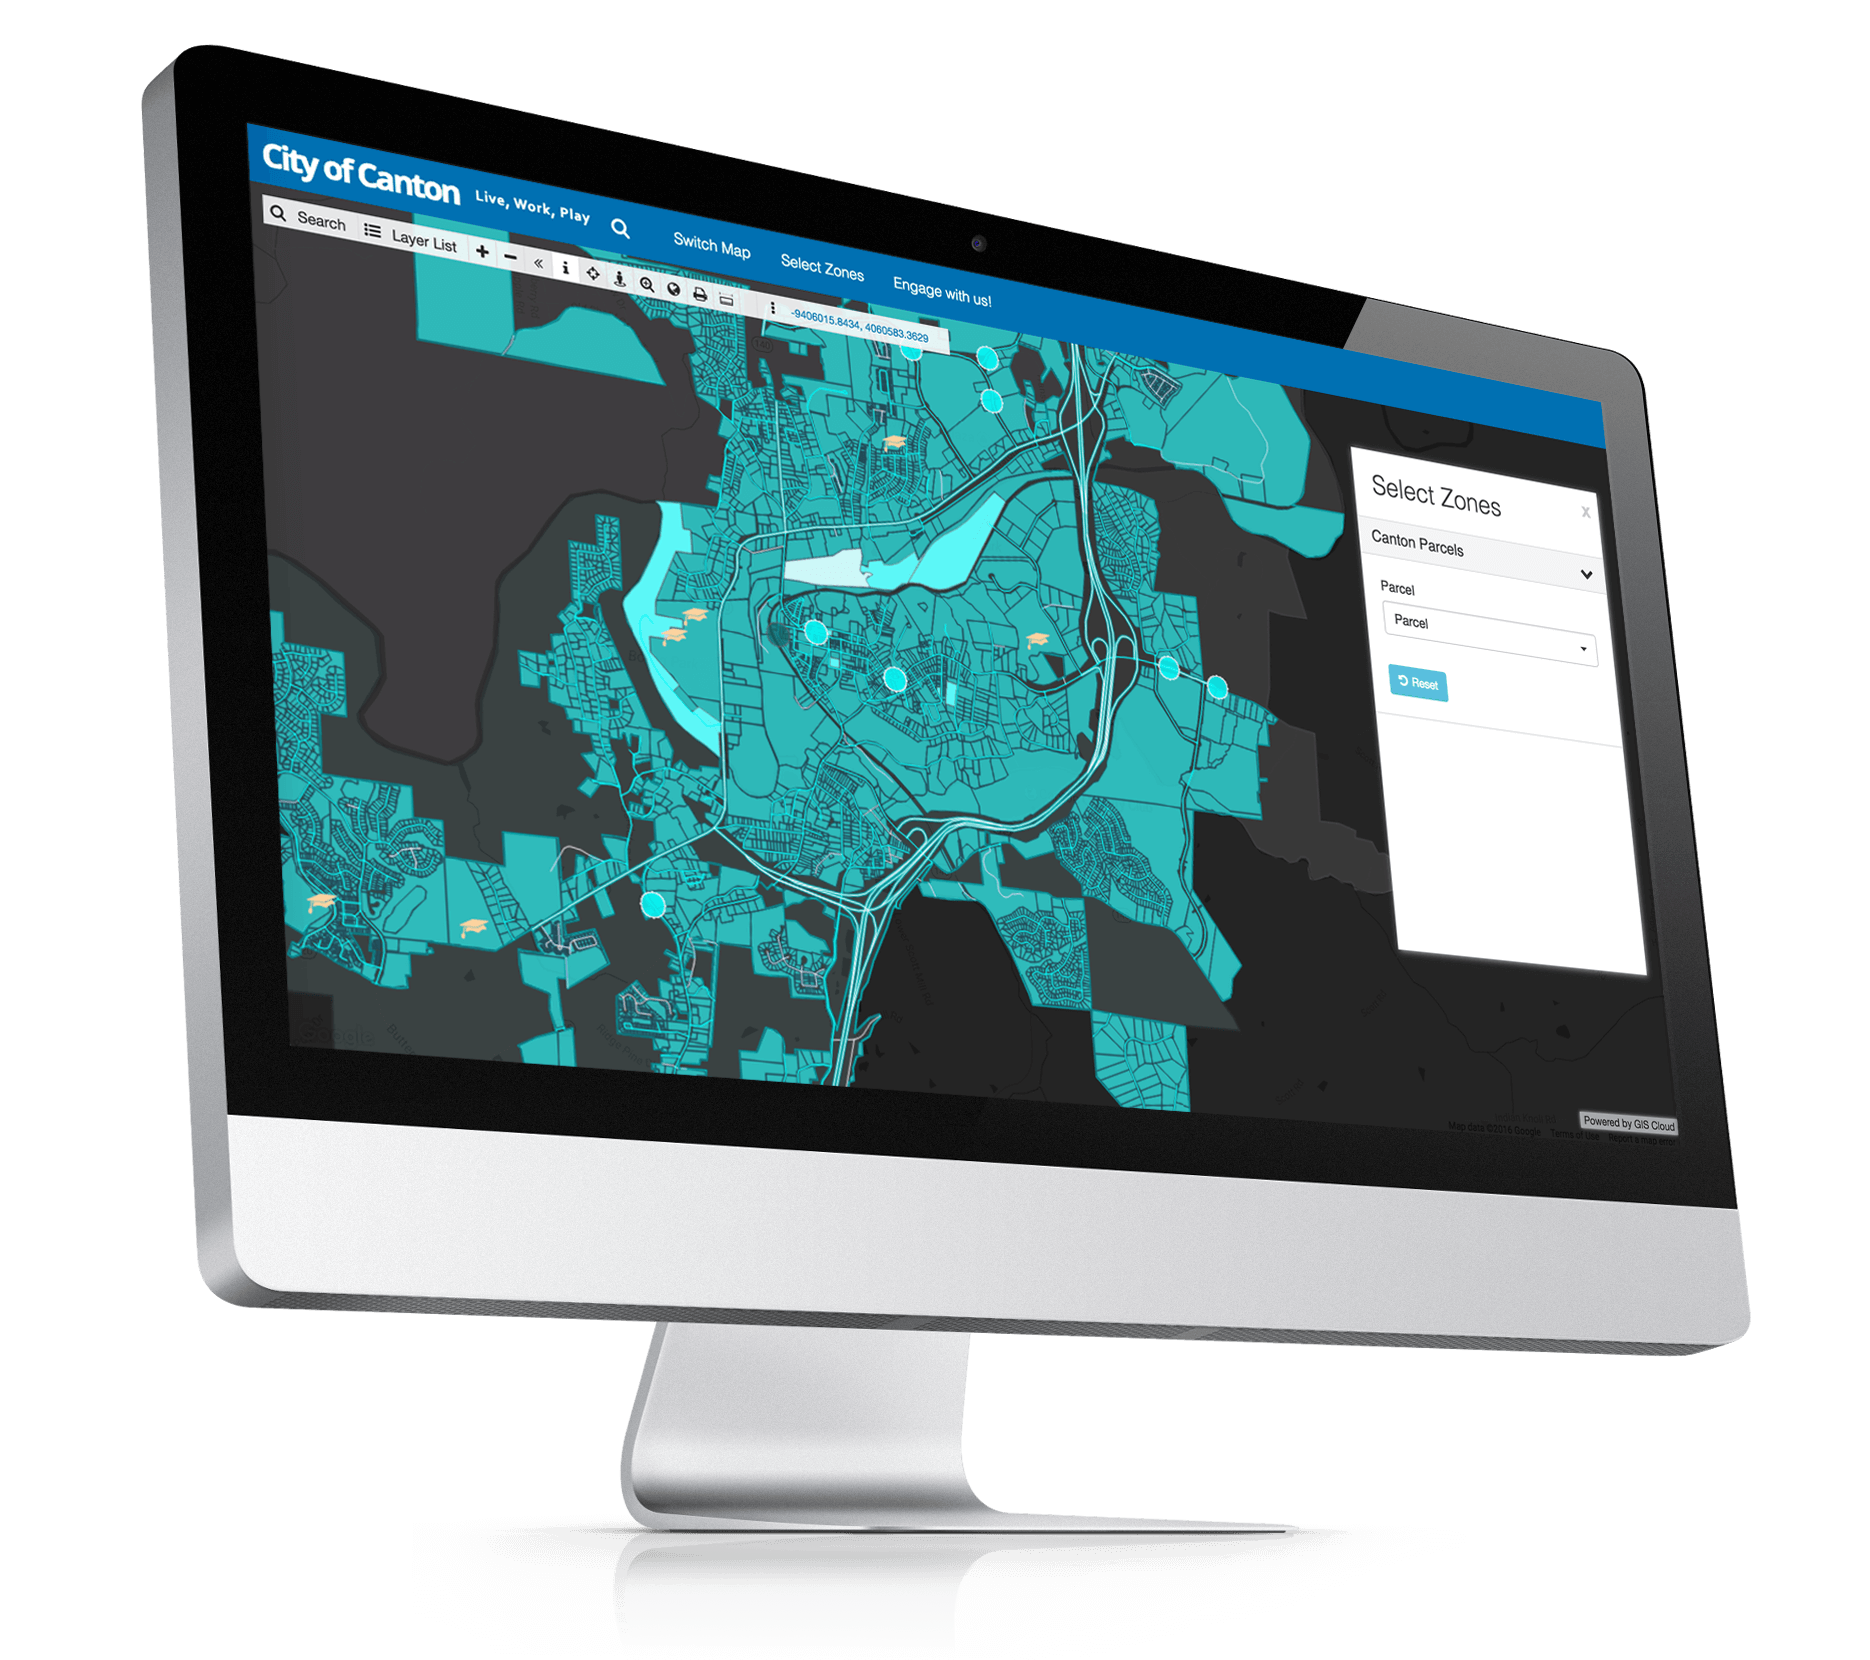 Map Portal is a simple and fast way for cities and organizations to display real-time data to the public